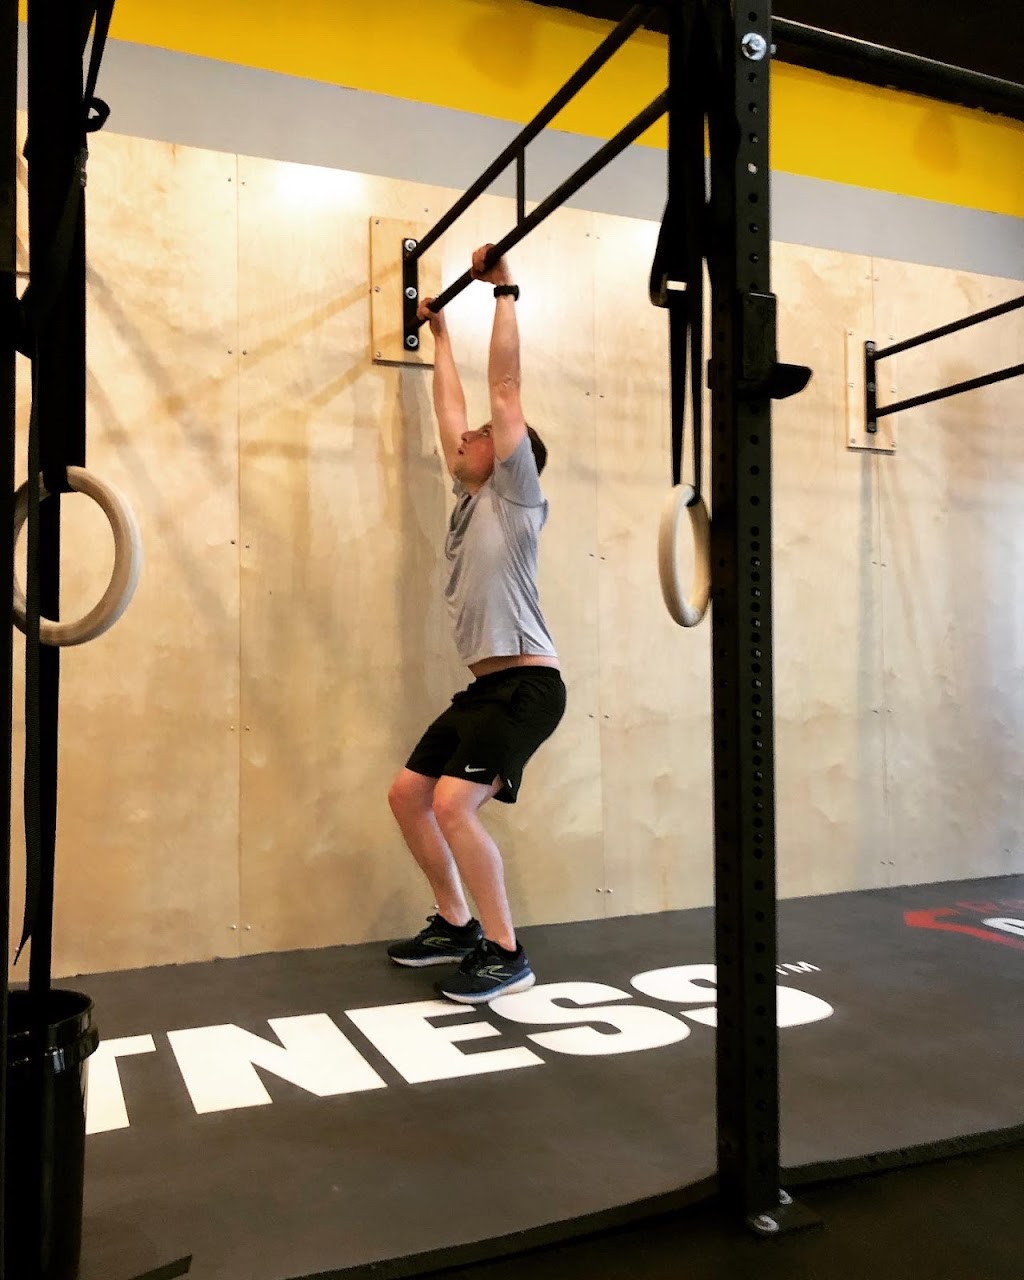 CrossFit Lansdale | Located behind the building, 668 Bethlehem Pike Unit 2B, Montgomeryville, PA 18936 | Phone: (267) 416-8399